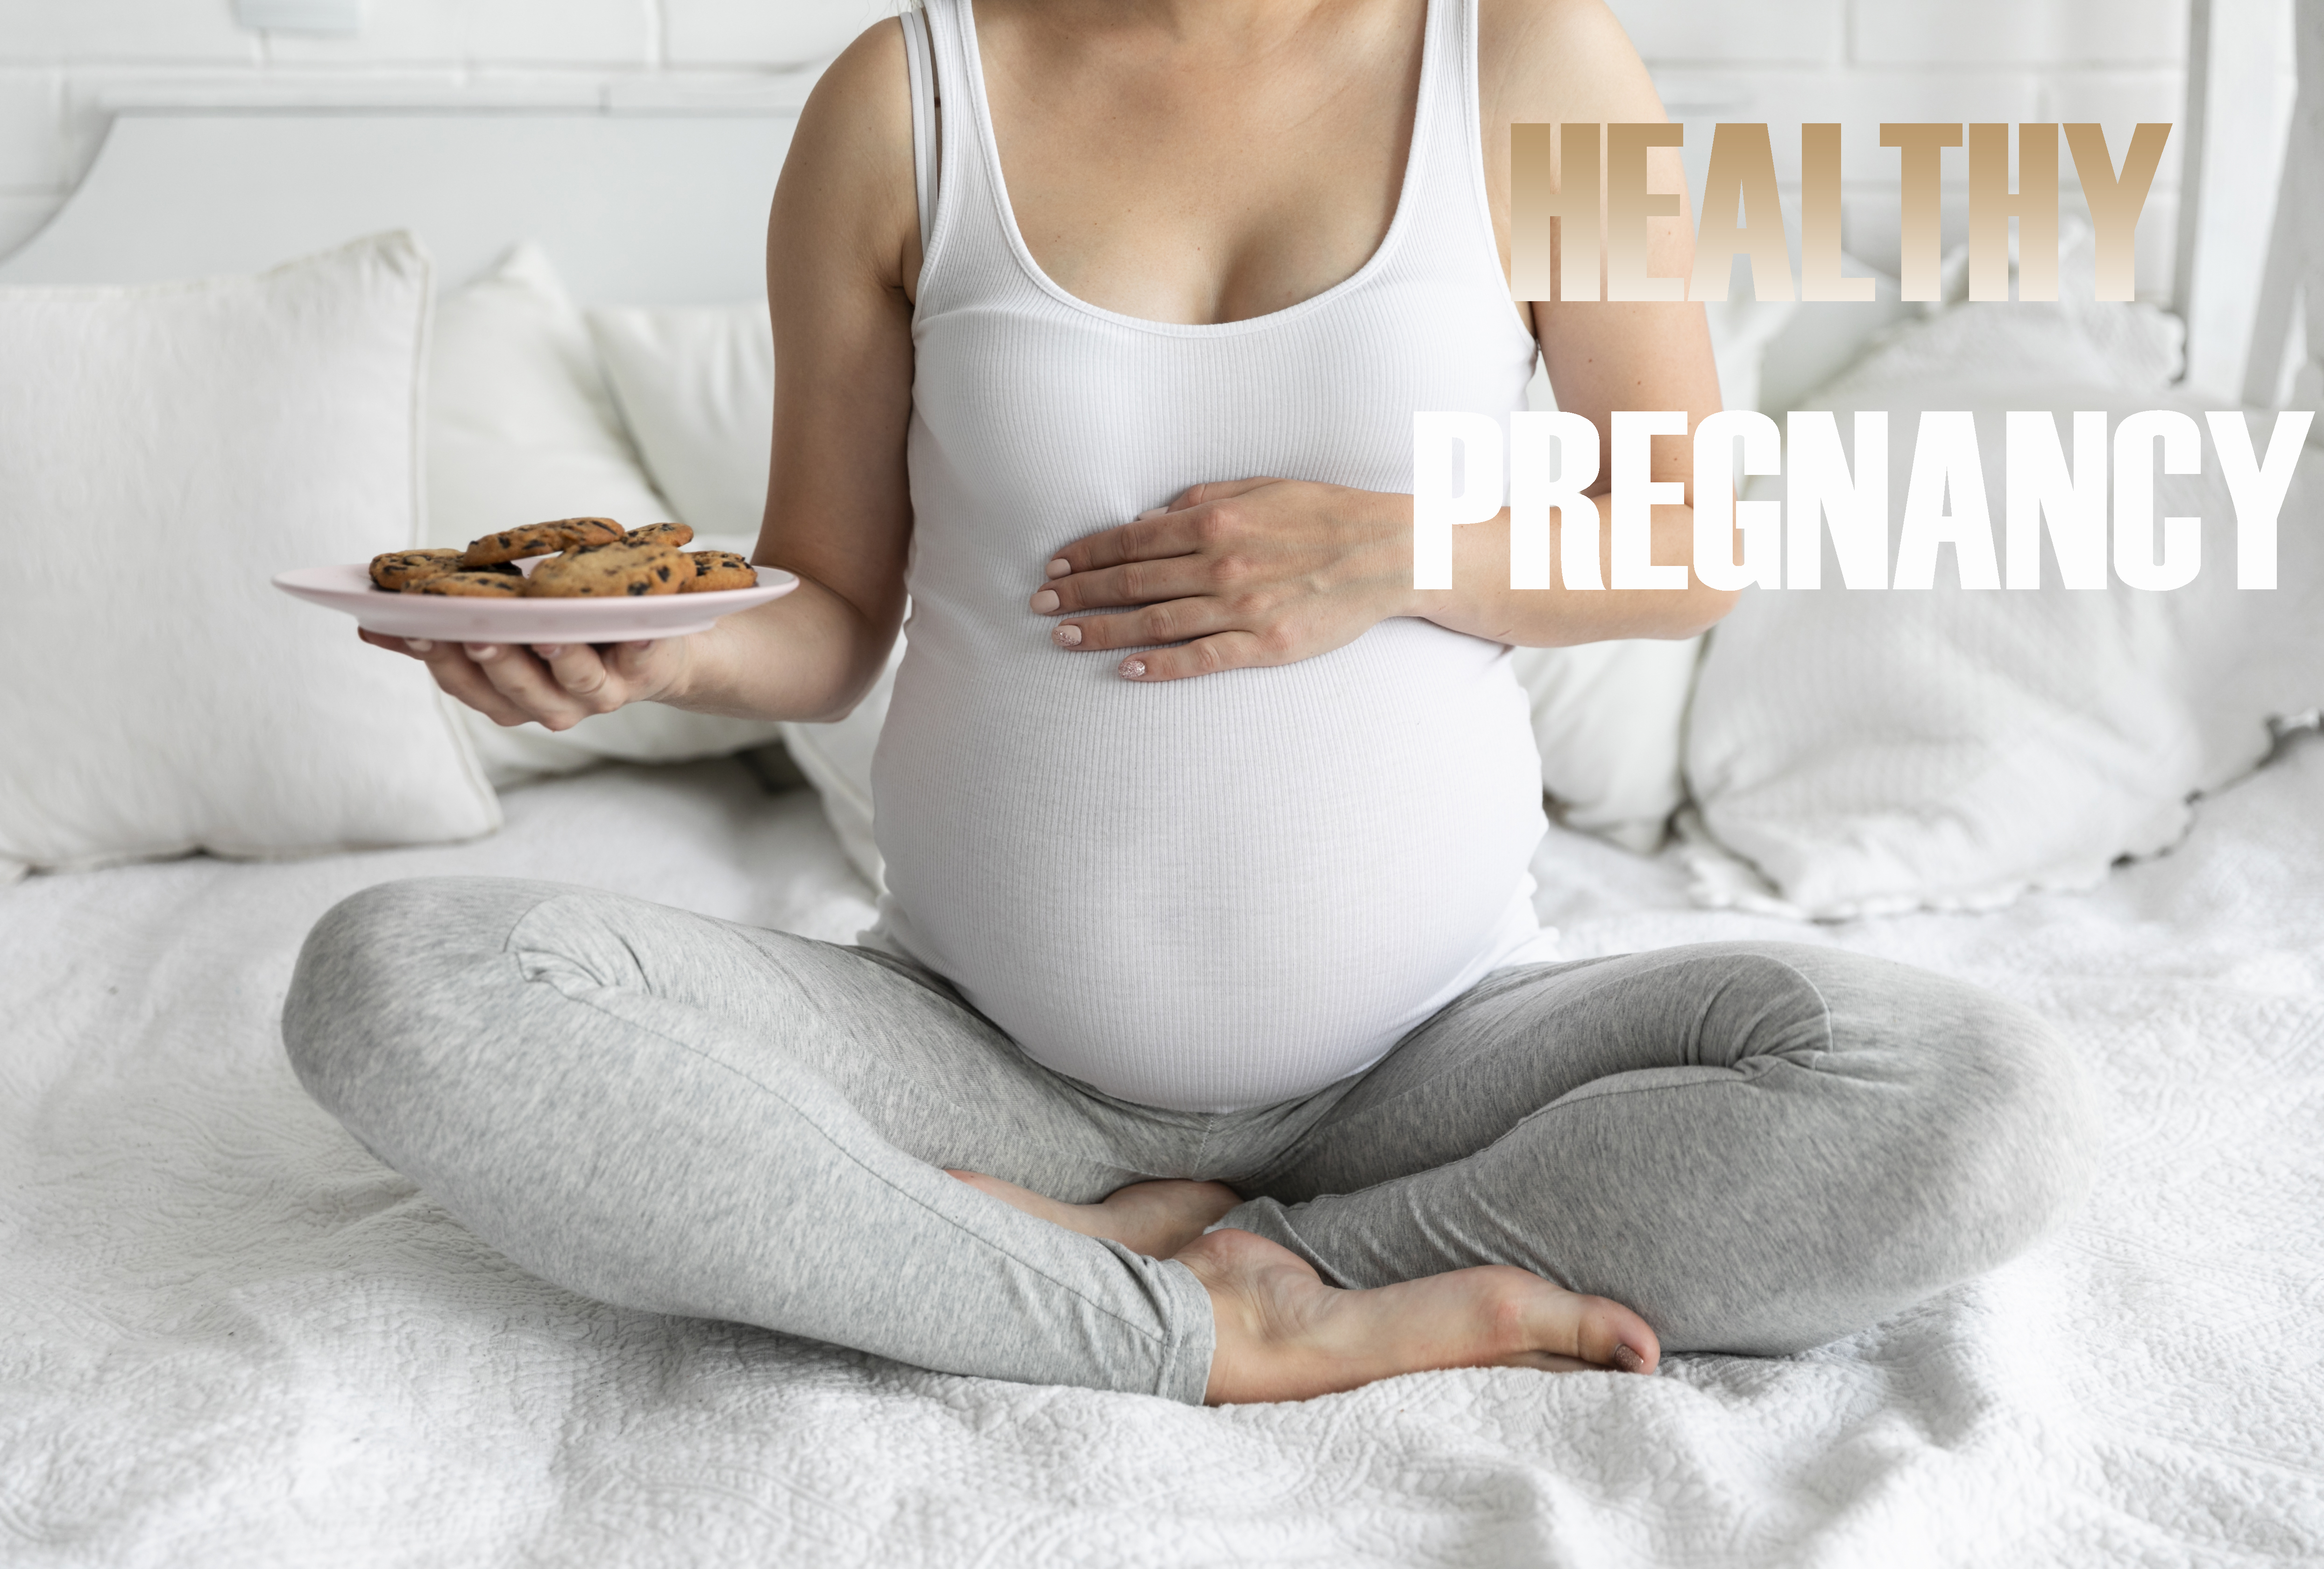 Top 10 reasons to stop smoking Improve your chances of having a healthier pregnancy and baby